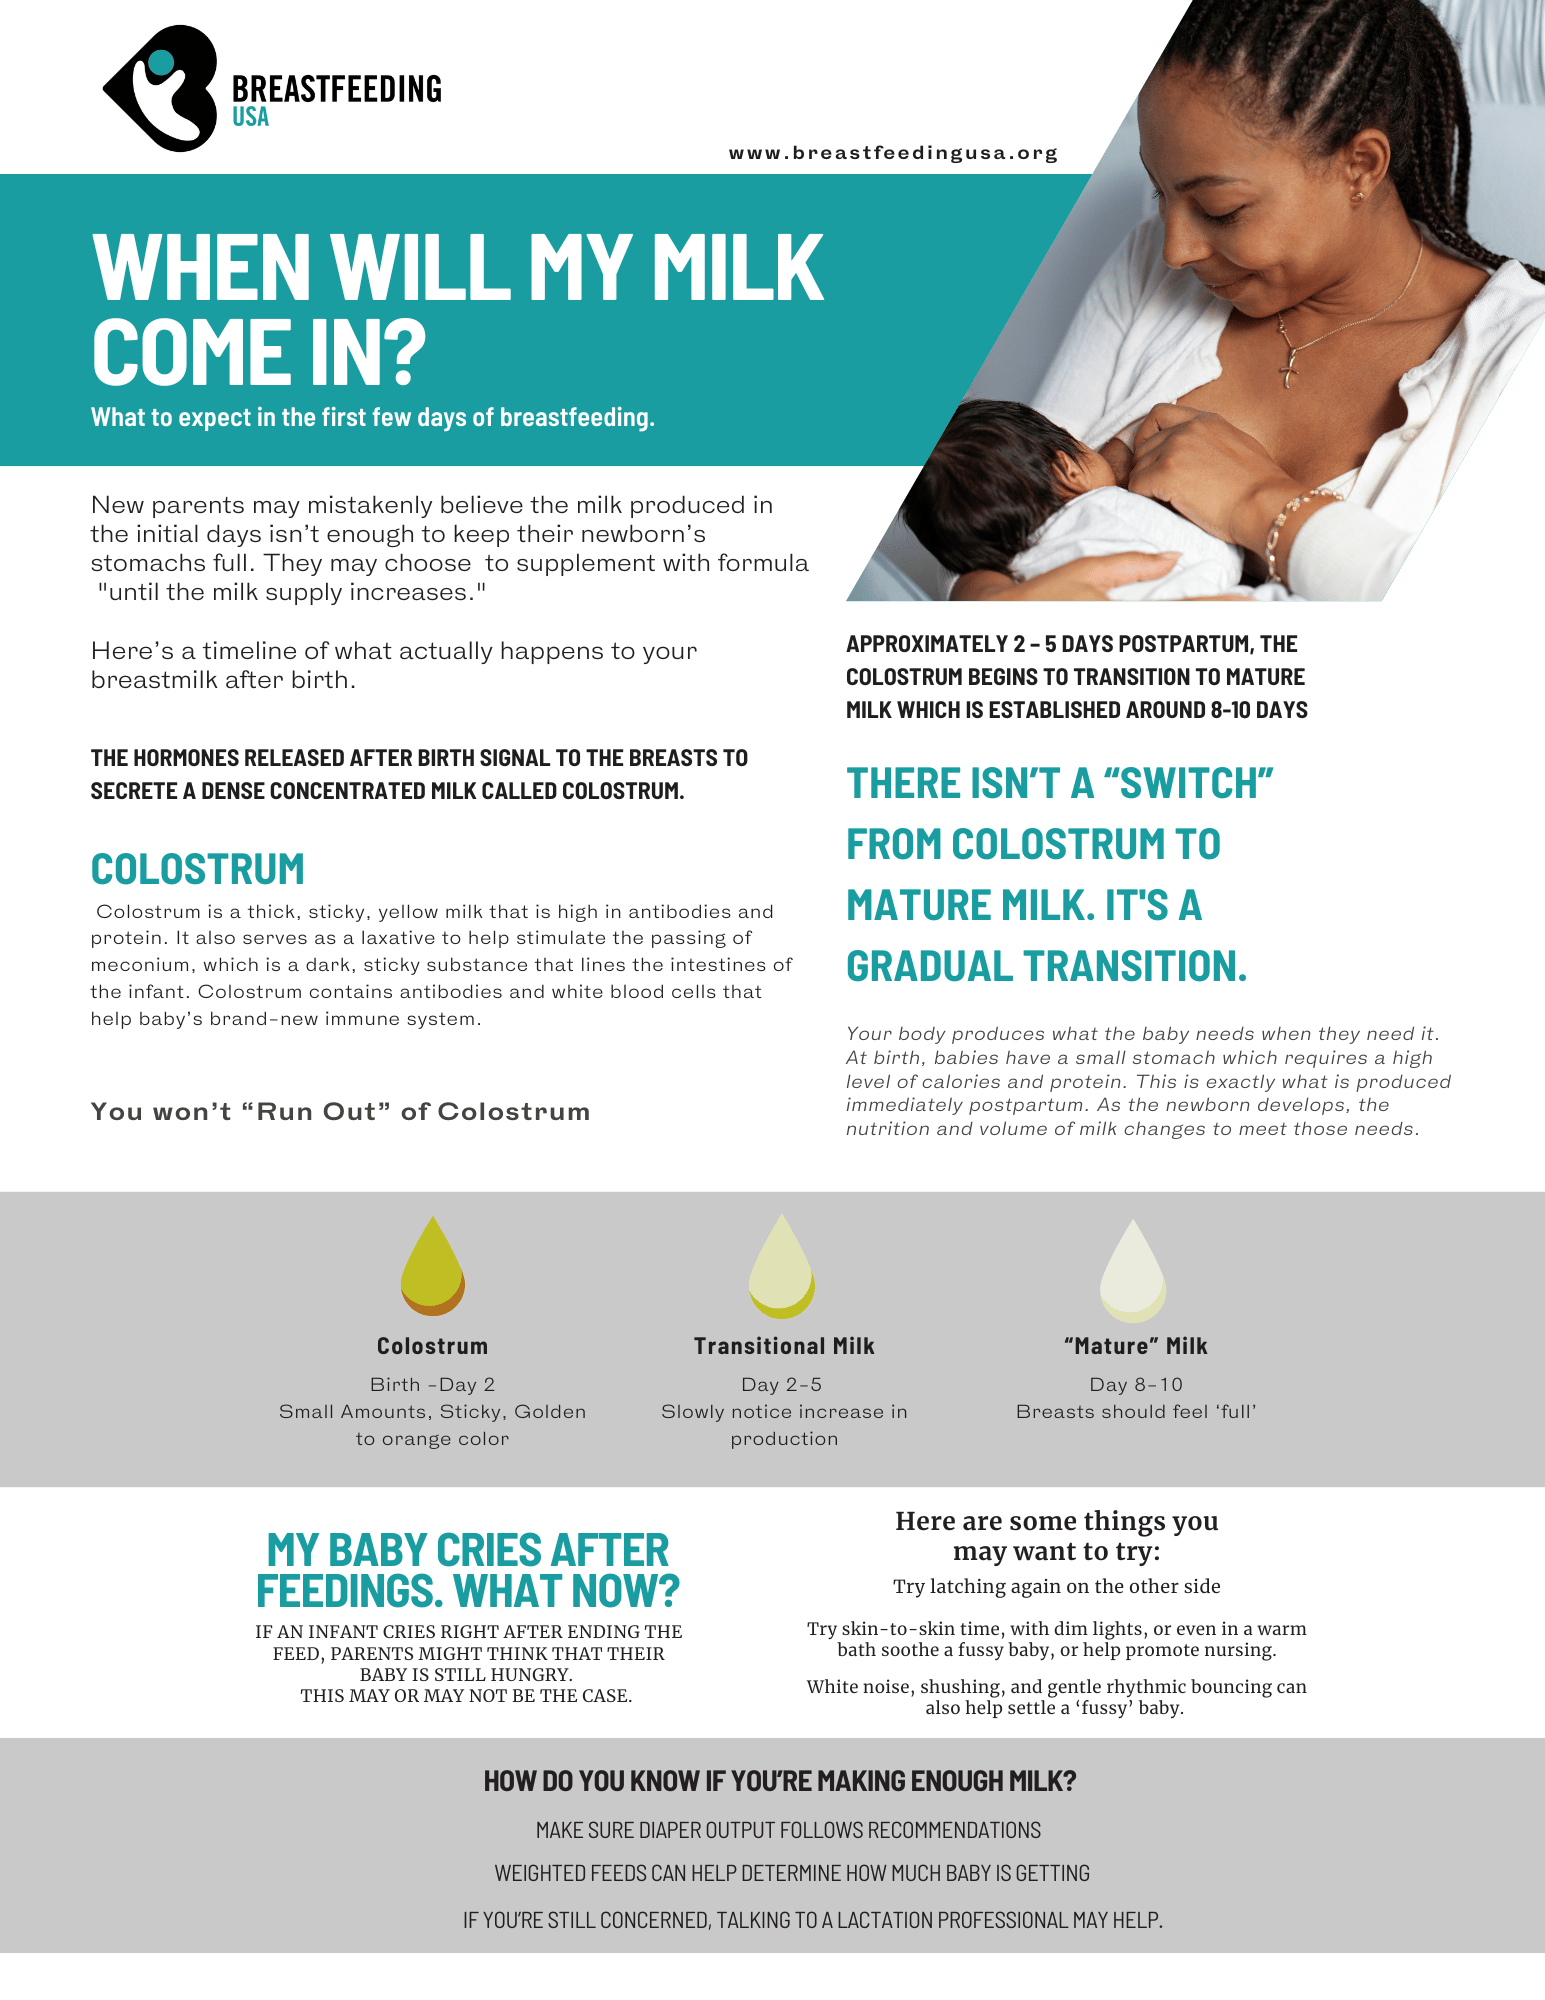 Printable: When will my milk come in?